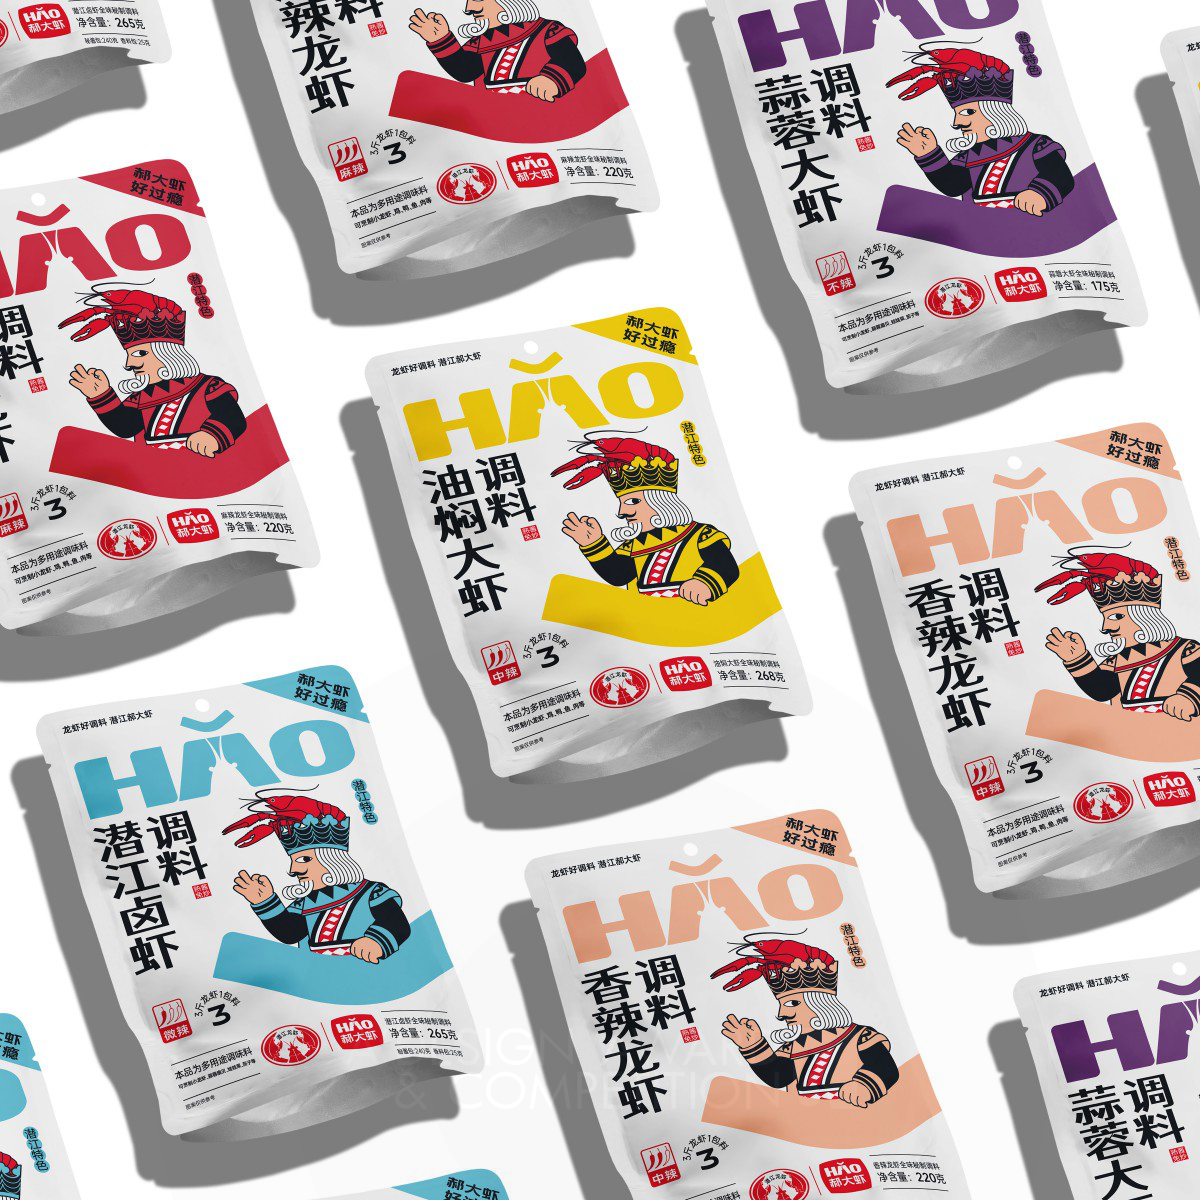 Jin Zhang wins Iron at the prestigious A' Packaging Design Award with Hao Prawns Seasoning Packaging.